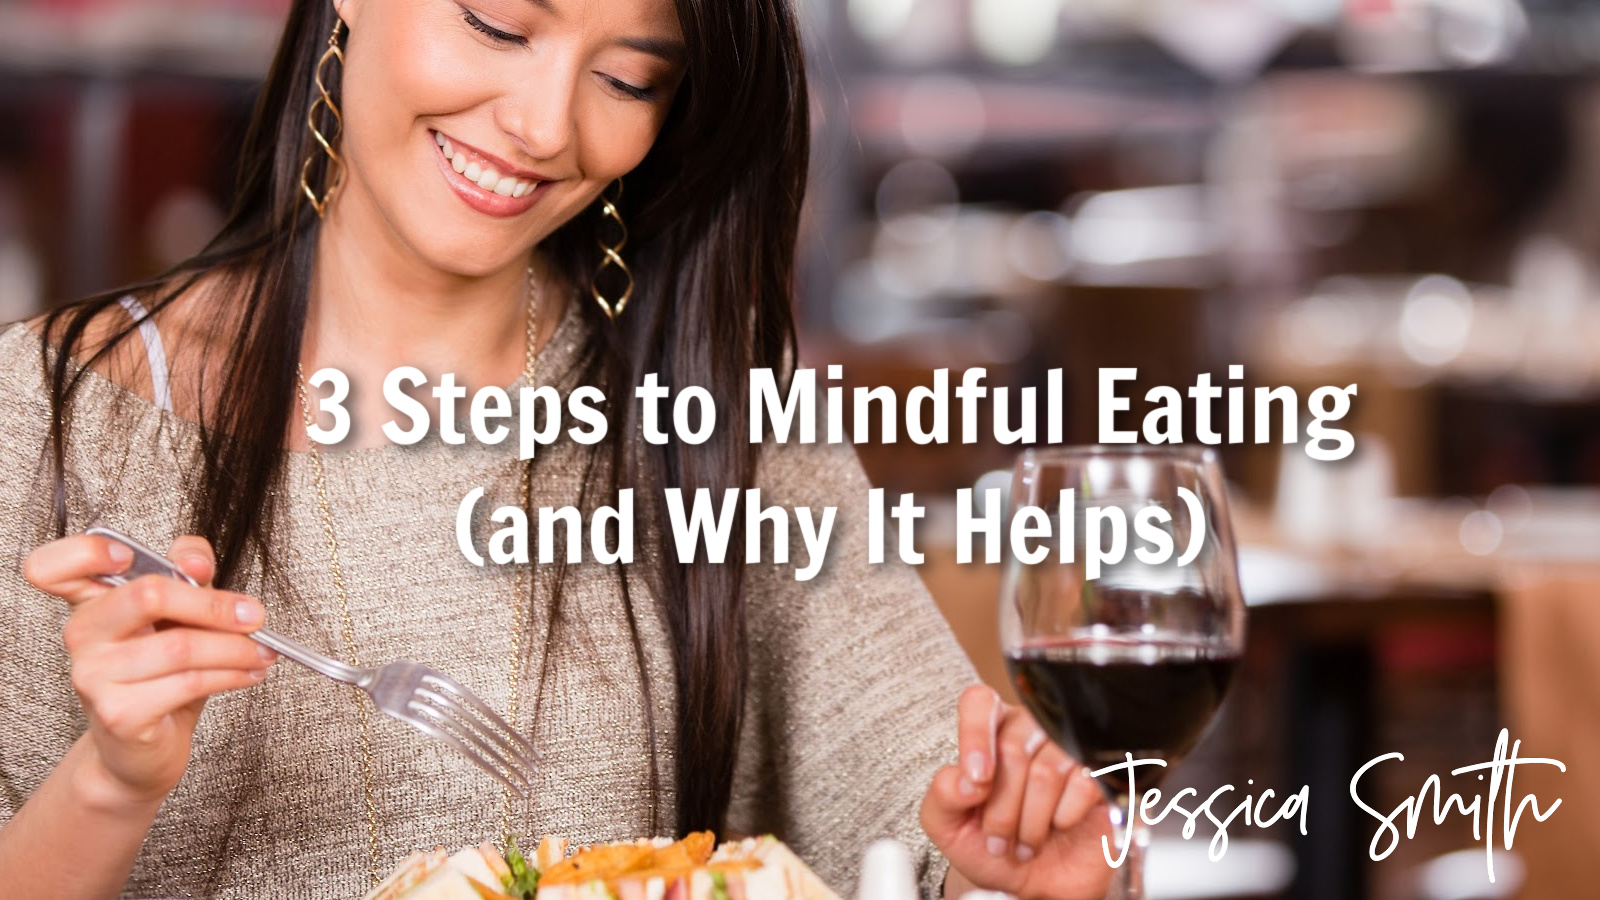 3 Steps to Mindful Eating (And Why It Helps)